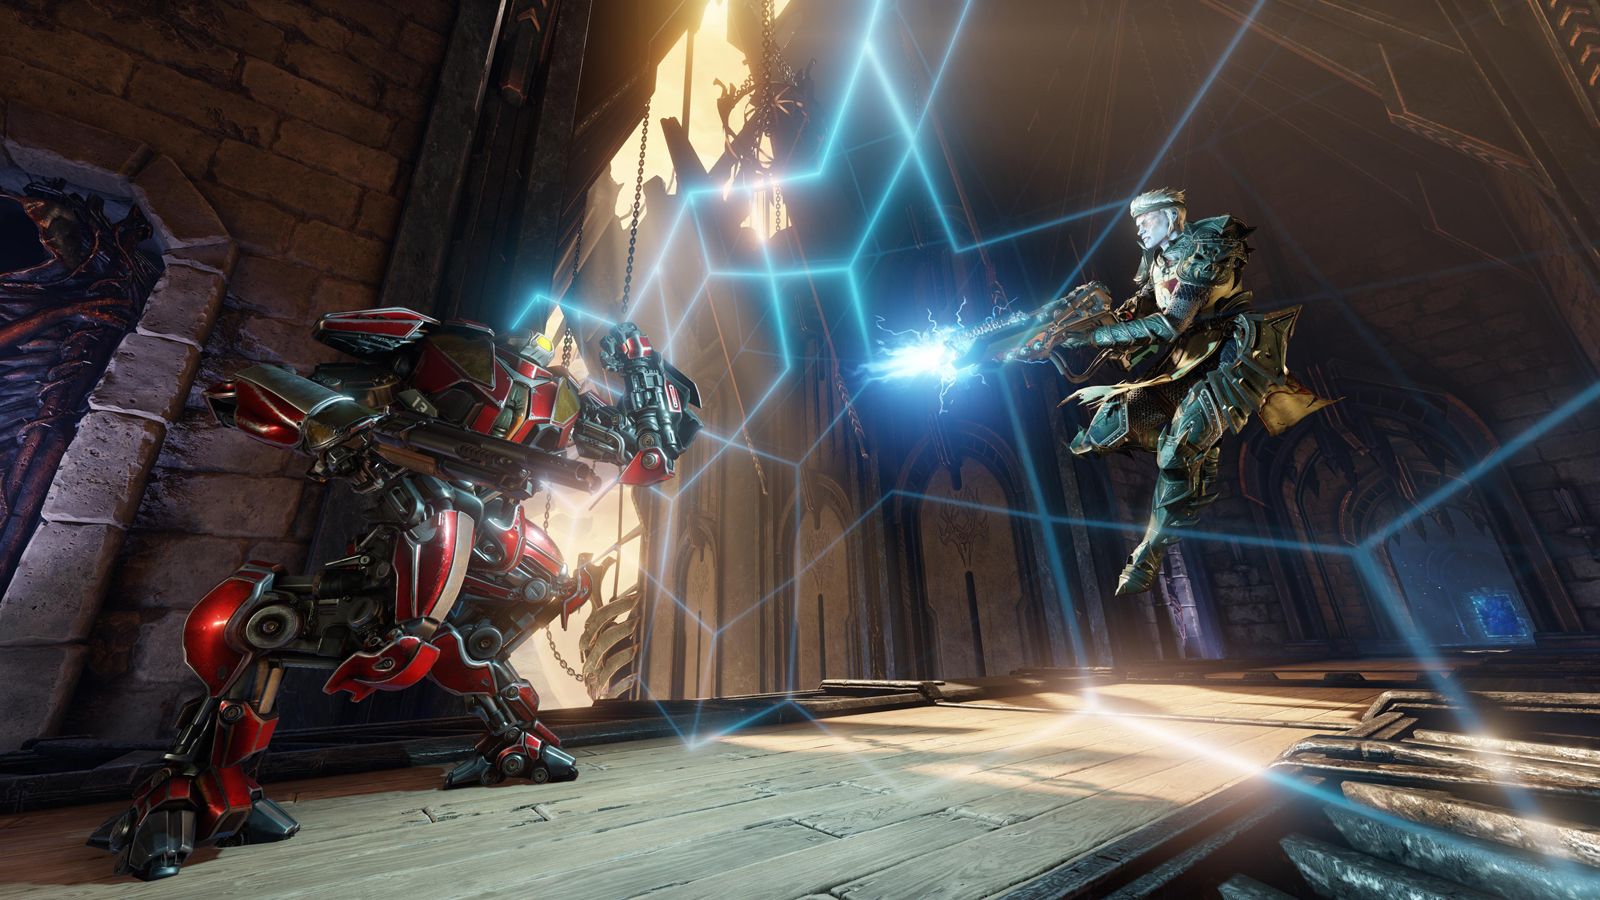 quake champions explained everything you should know about the return of the esports king image 12